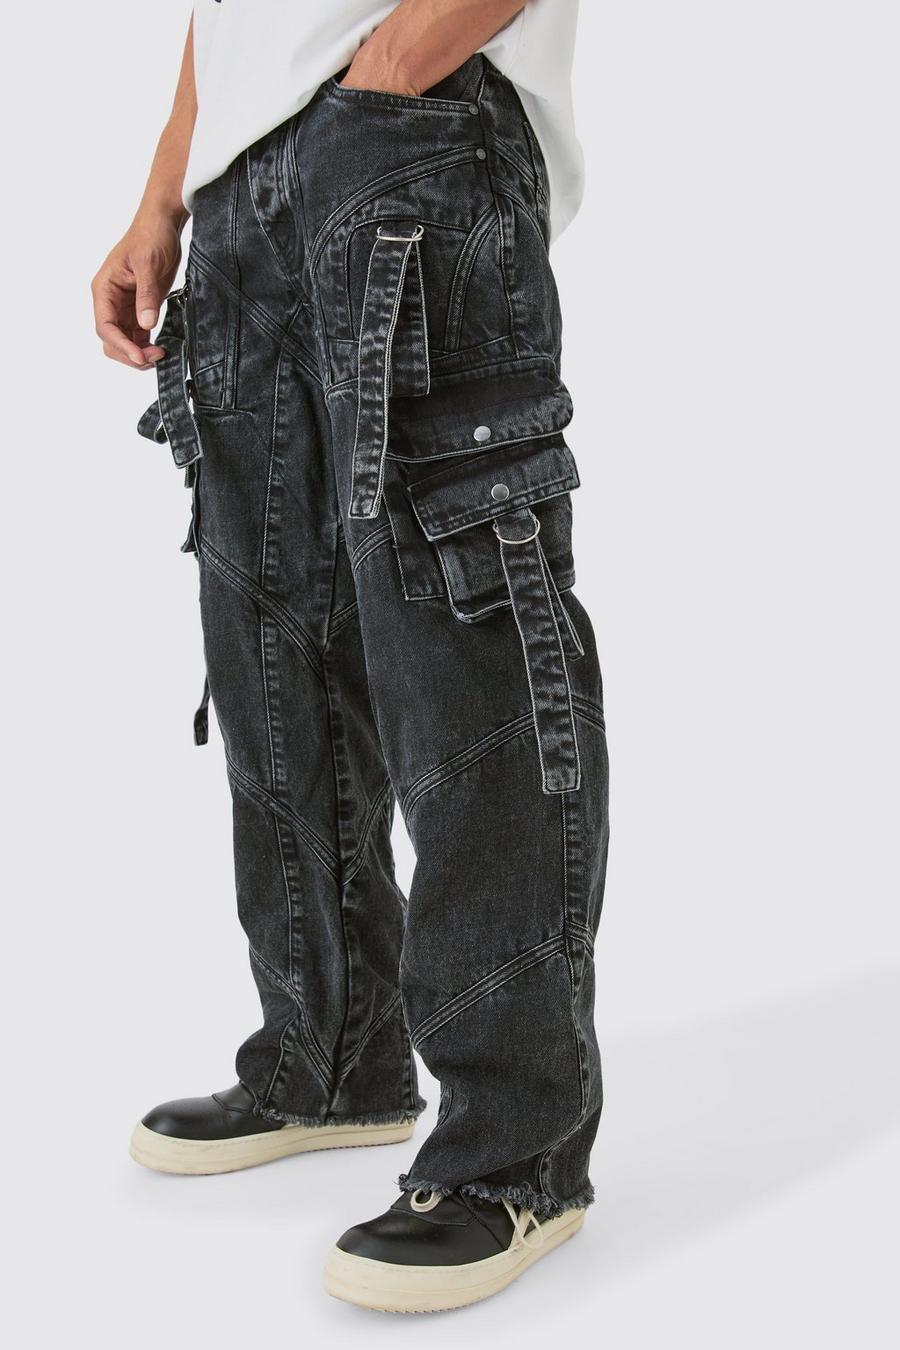 Baggy Rigid Strap And Buckle Detail Jean In Washed Black